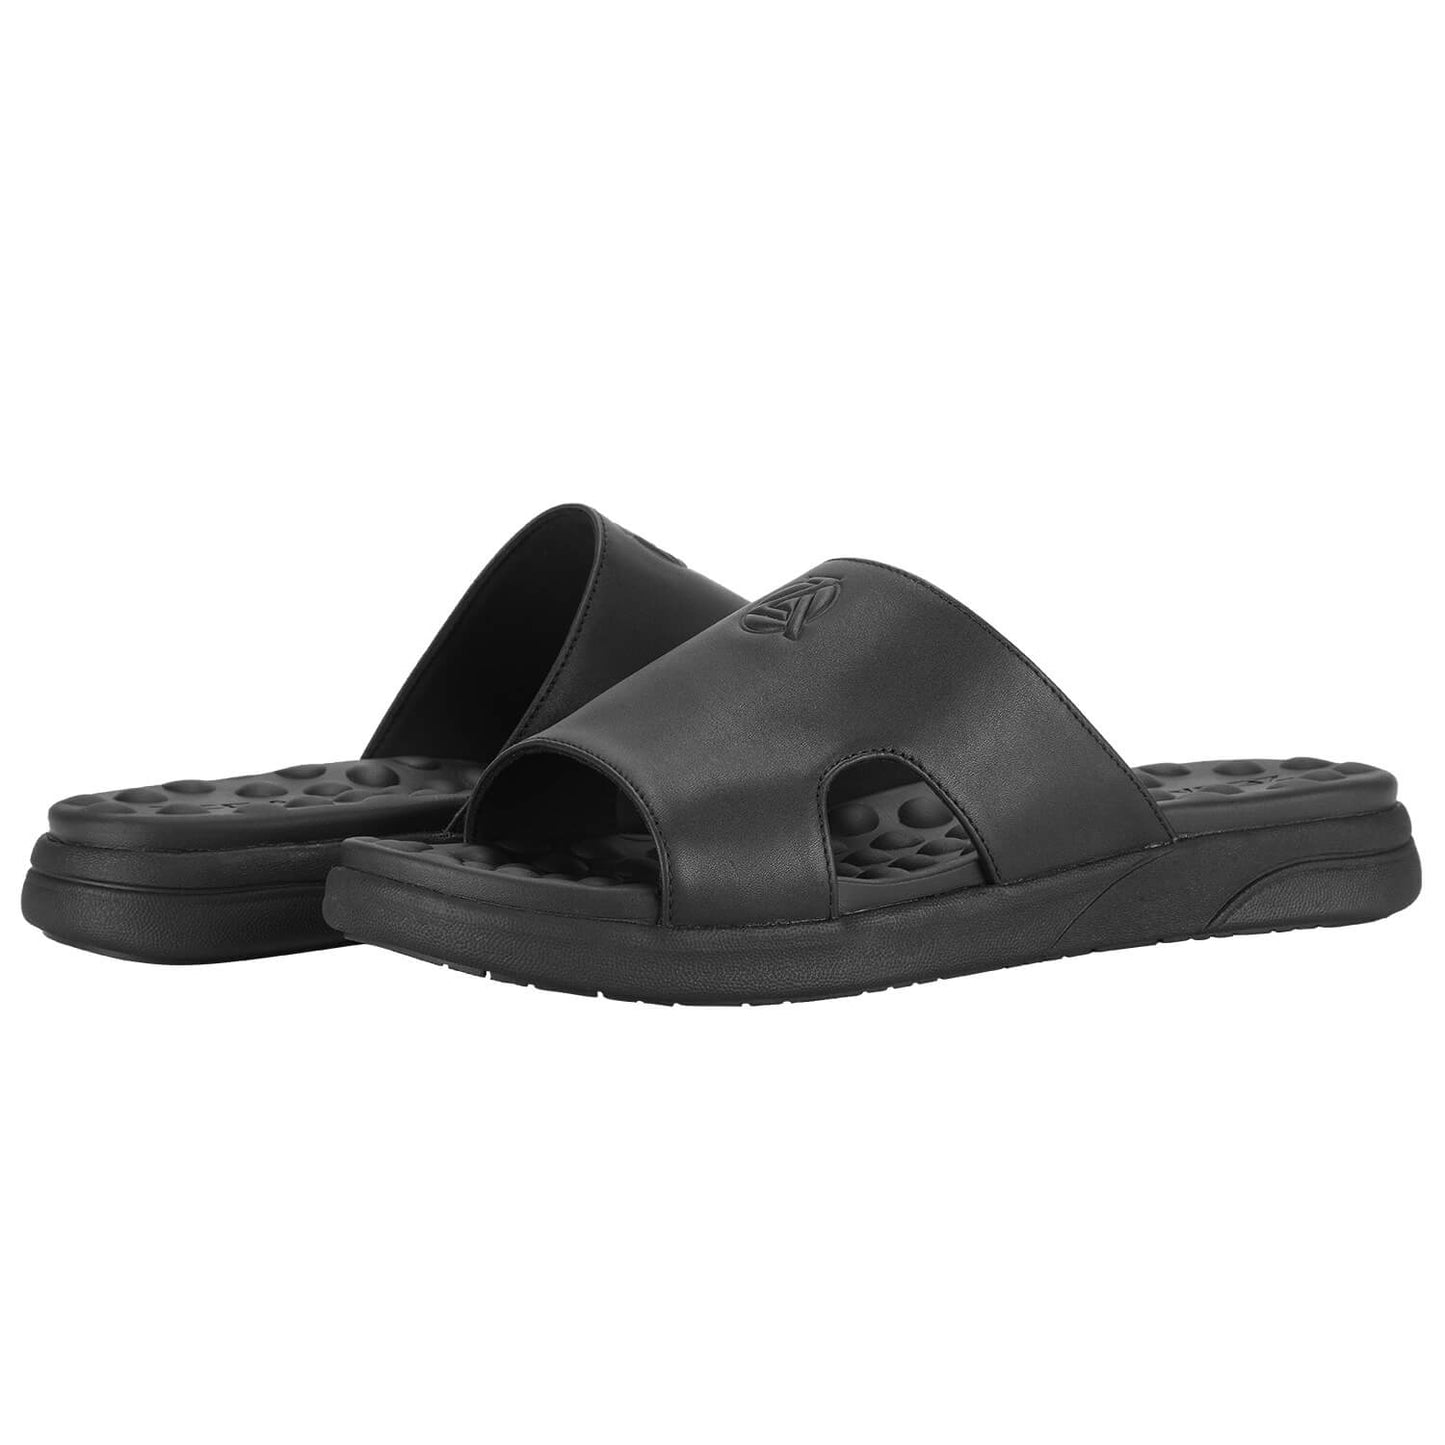 Black Massaging Leather Sandals (Sizes 7-16 Available)